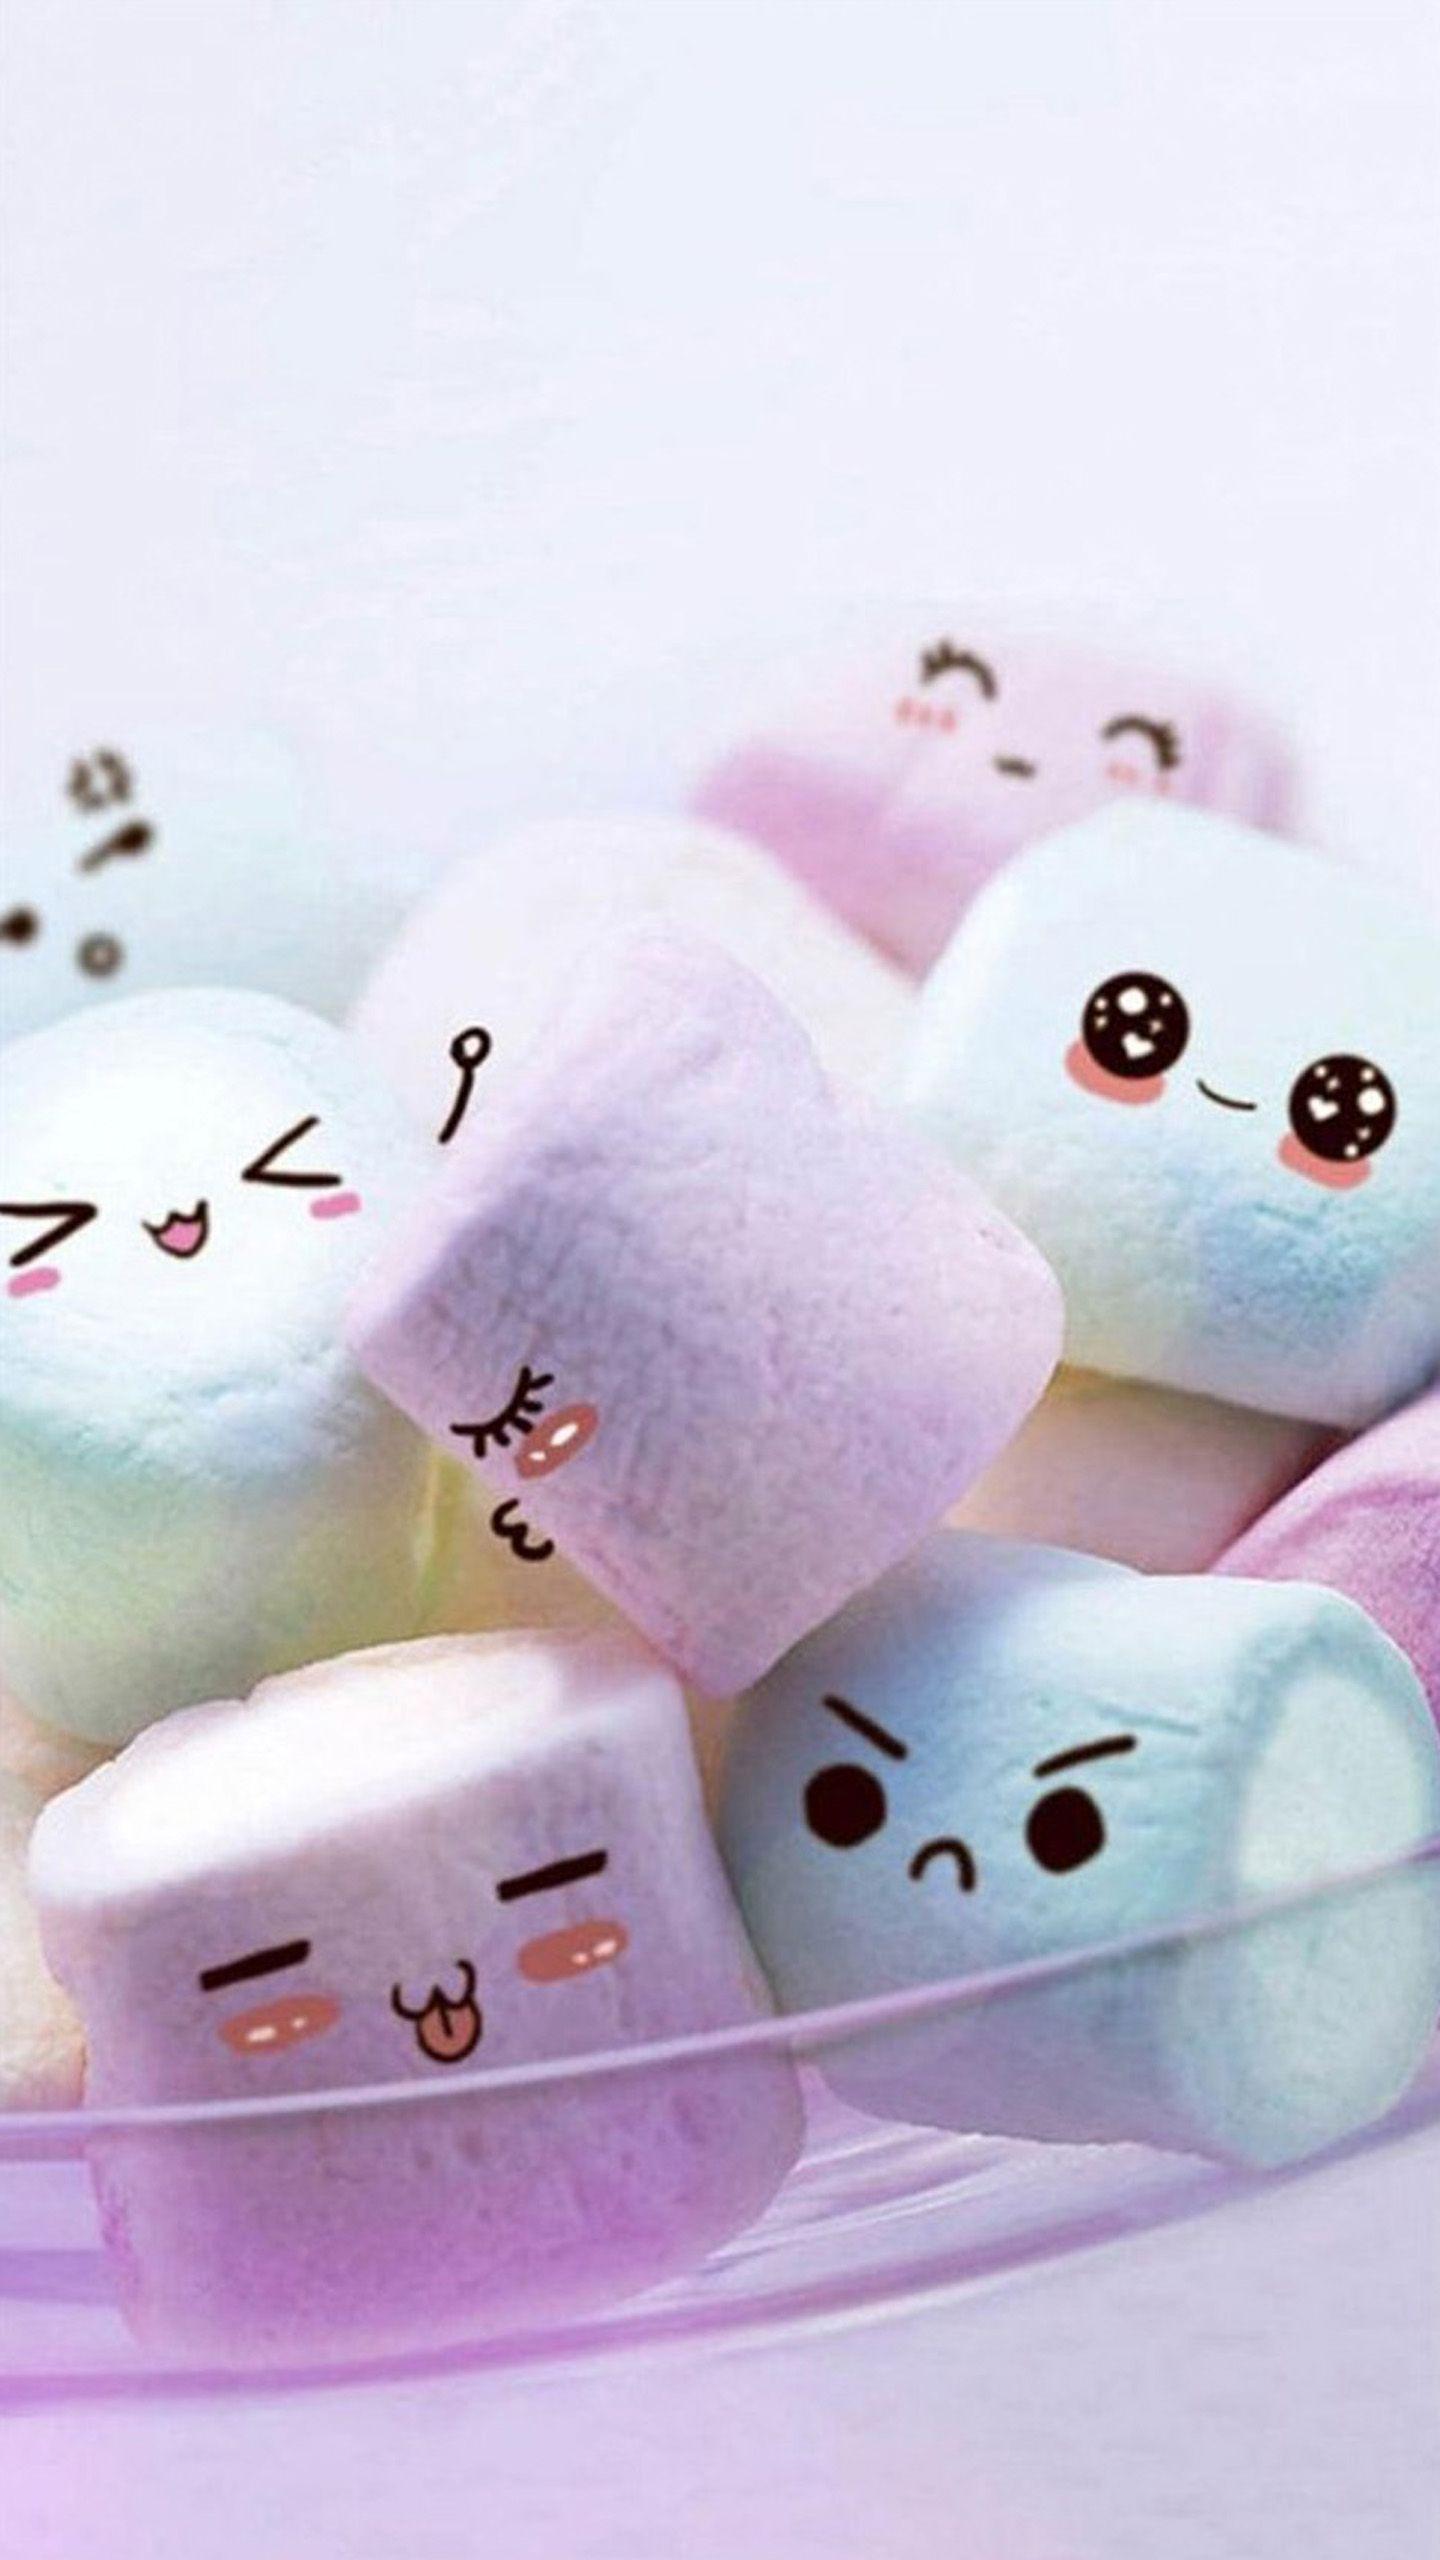 Cute Candy Wallpapers